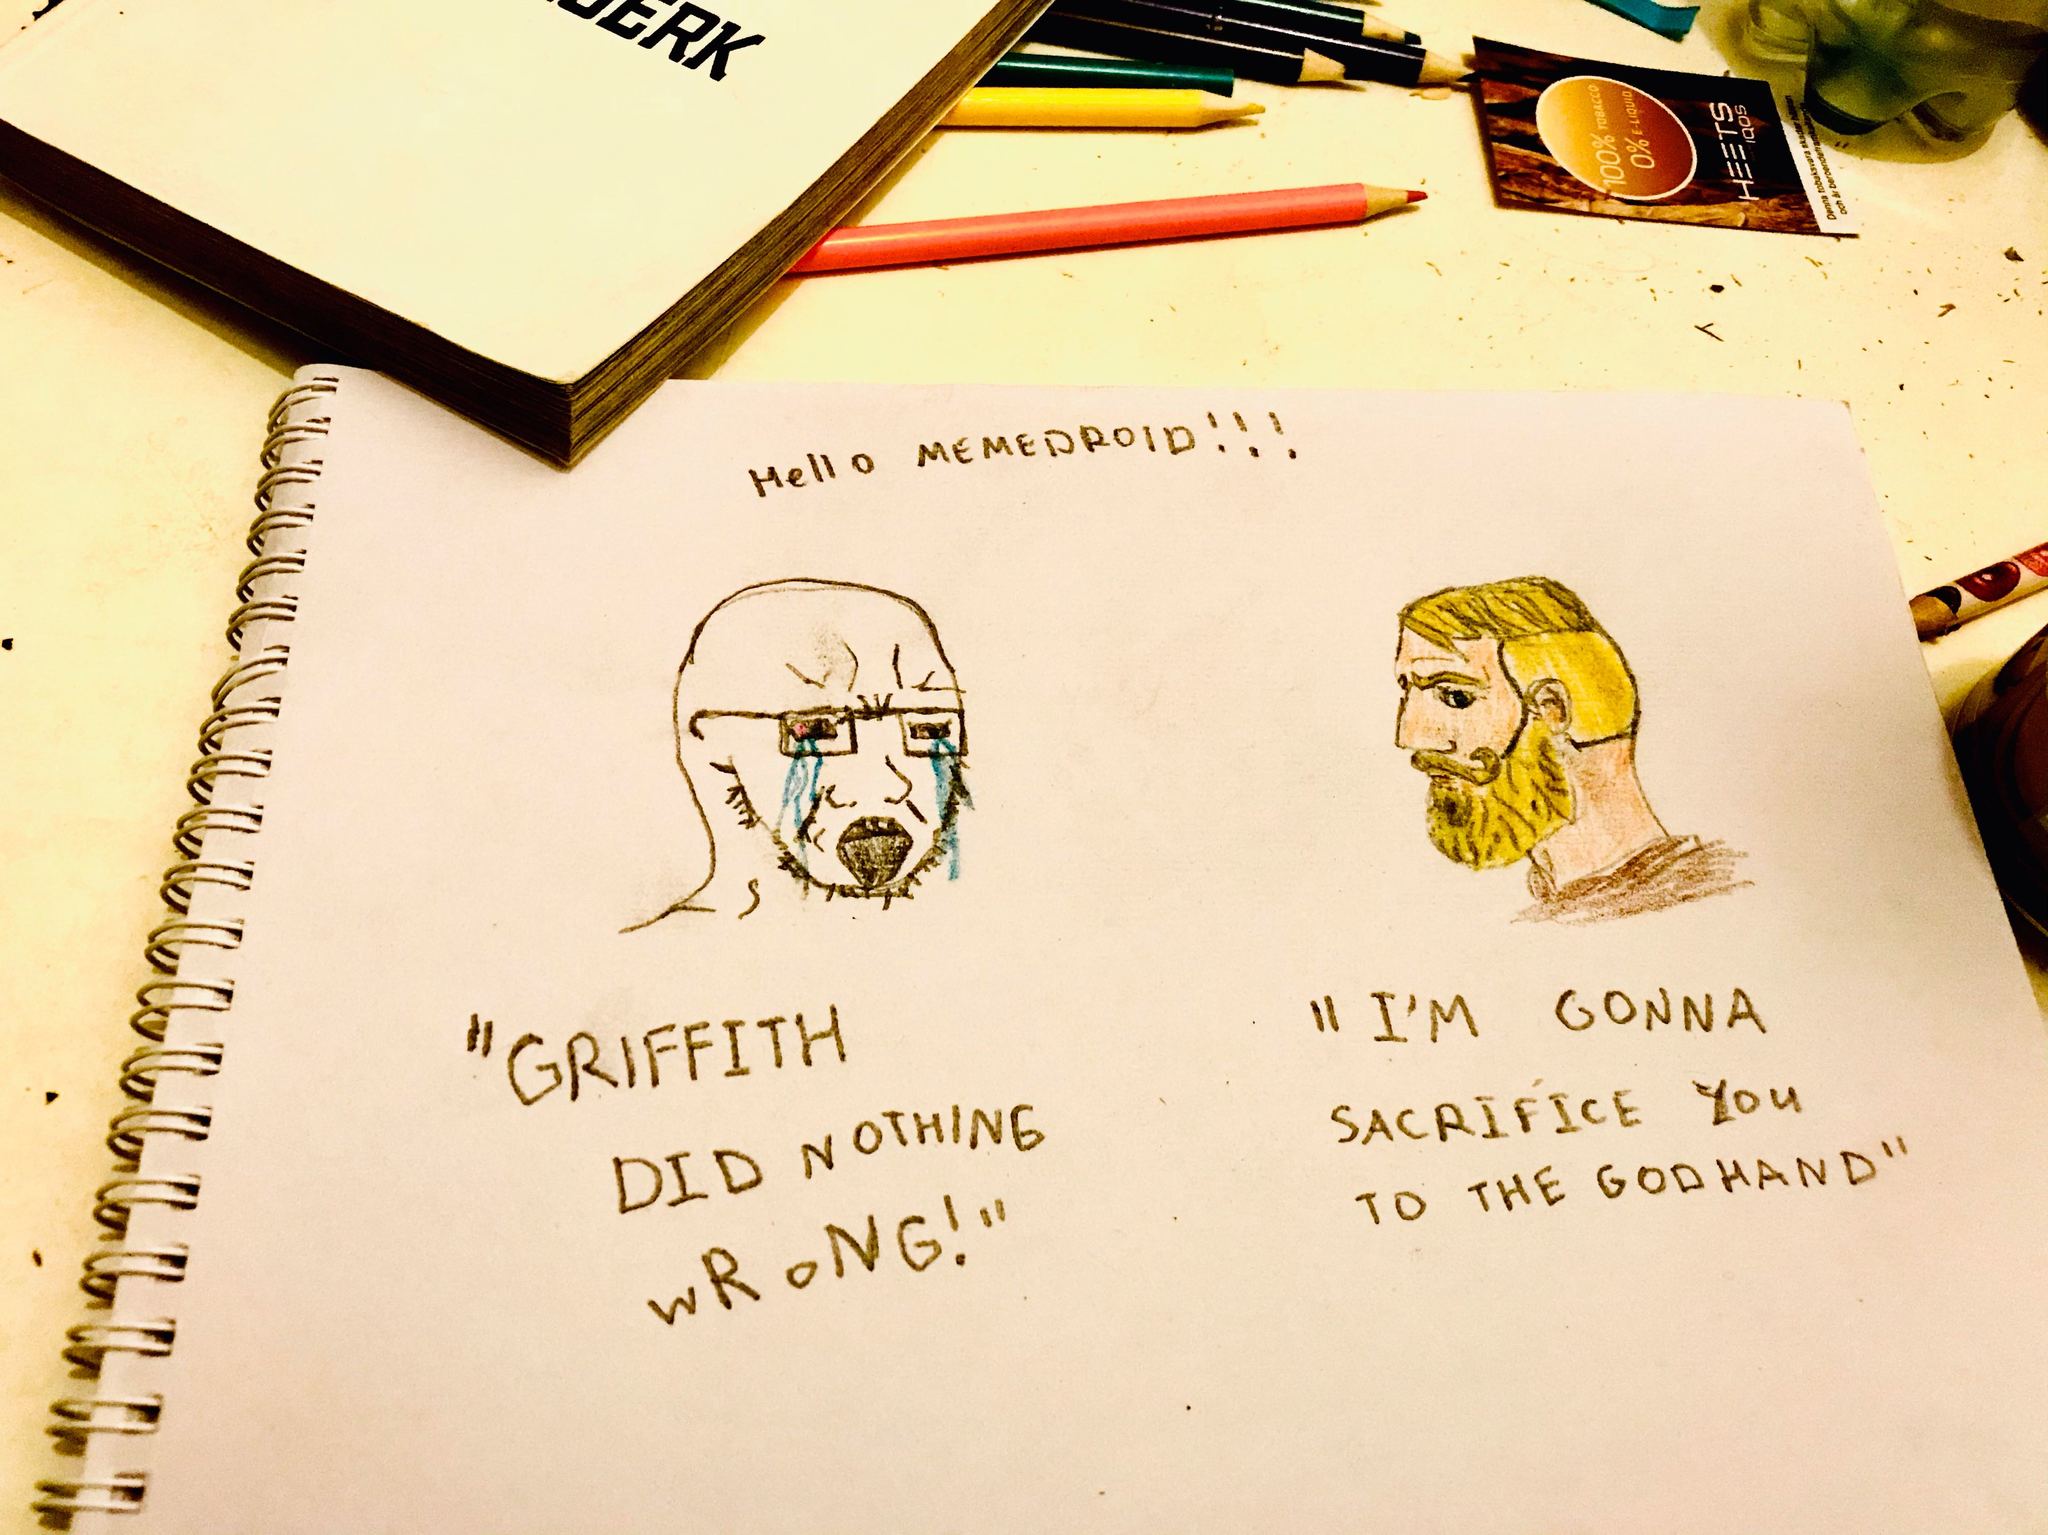 my first hand drawn meme ( spoiler: i suck at it)